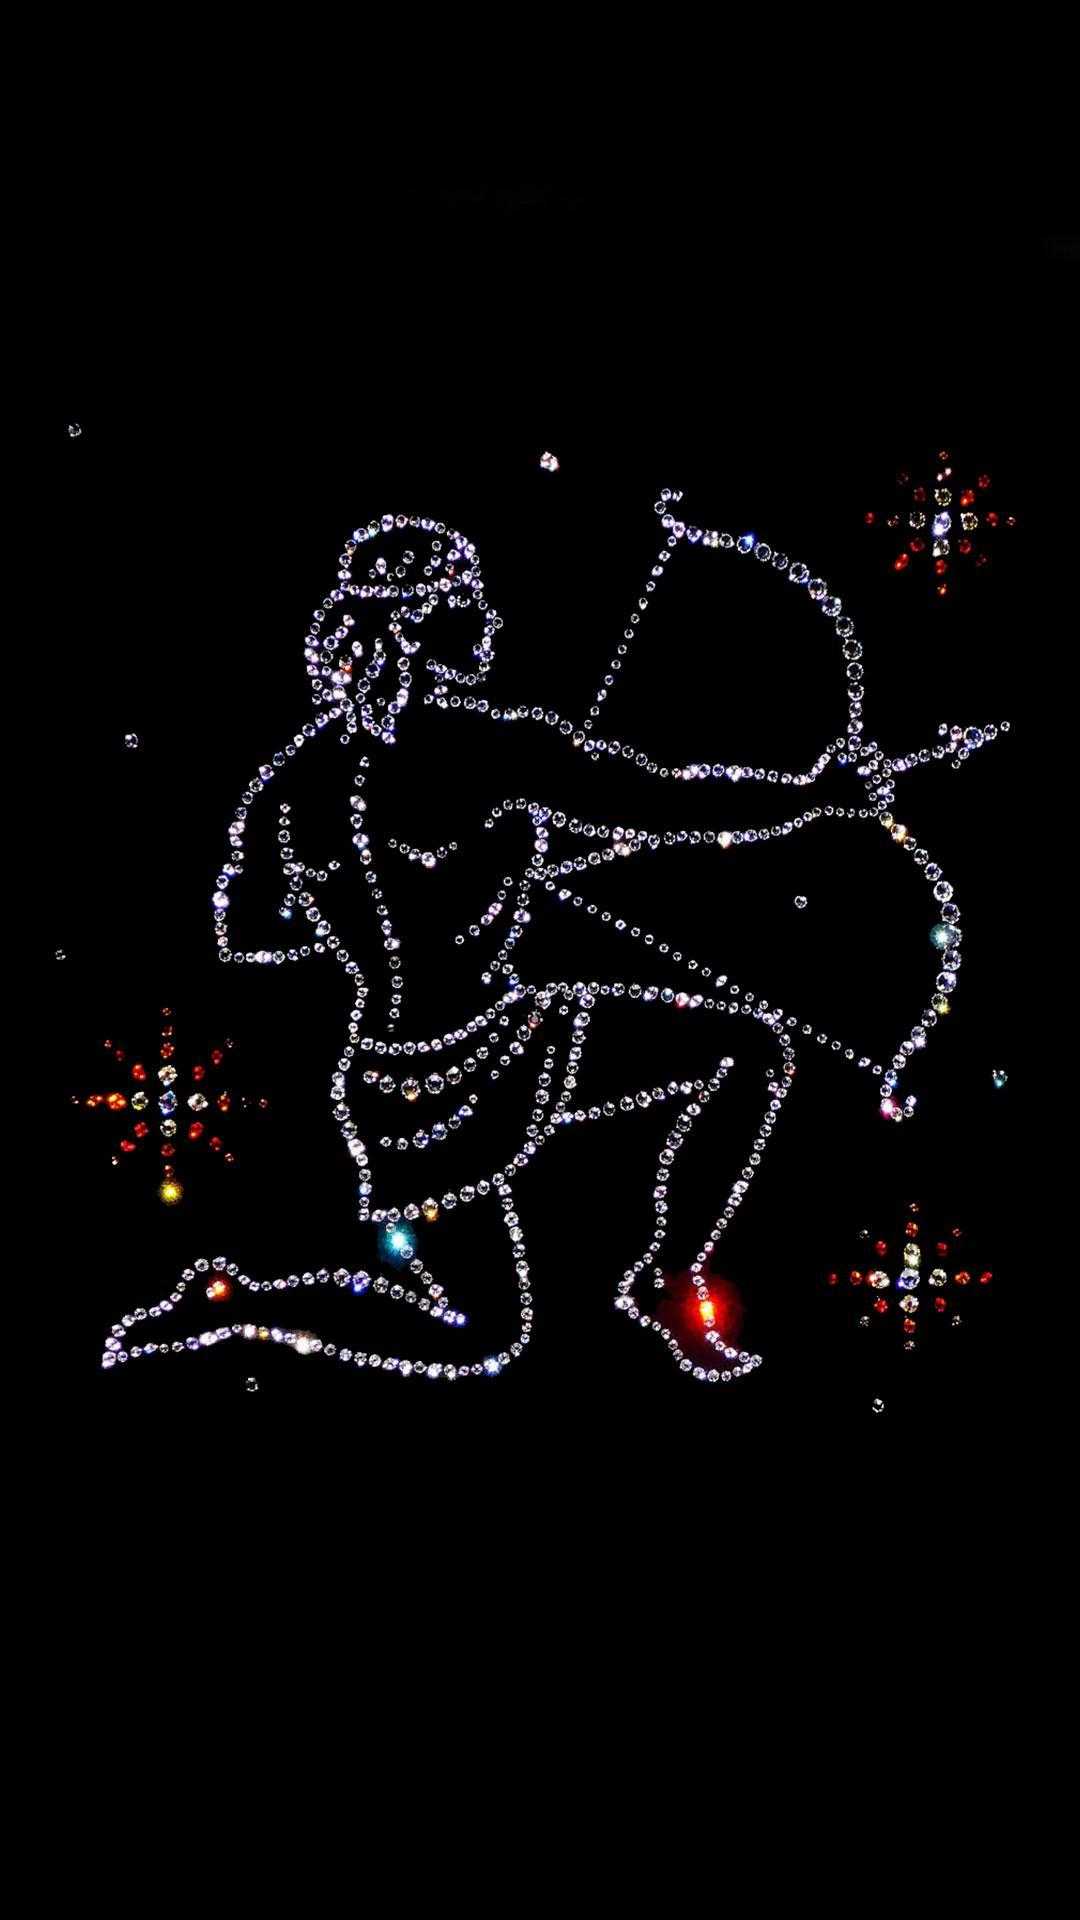 The silhouette of a person holding a bow and arrow, surrounded by stars. - Constellation, Sagittarius